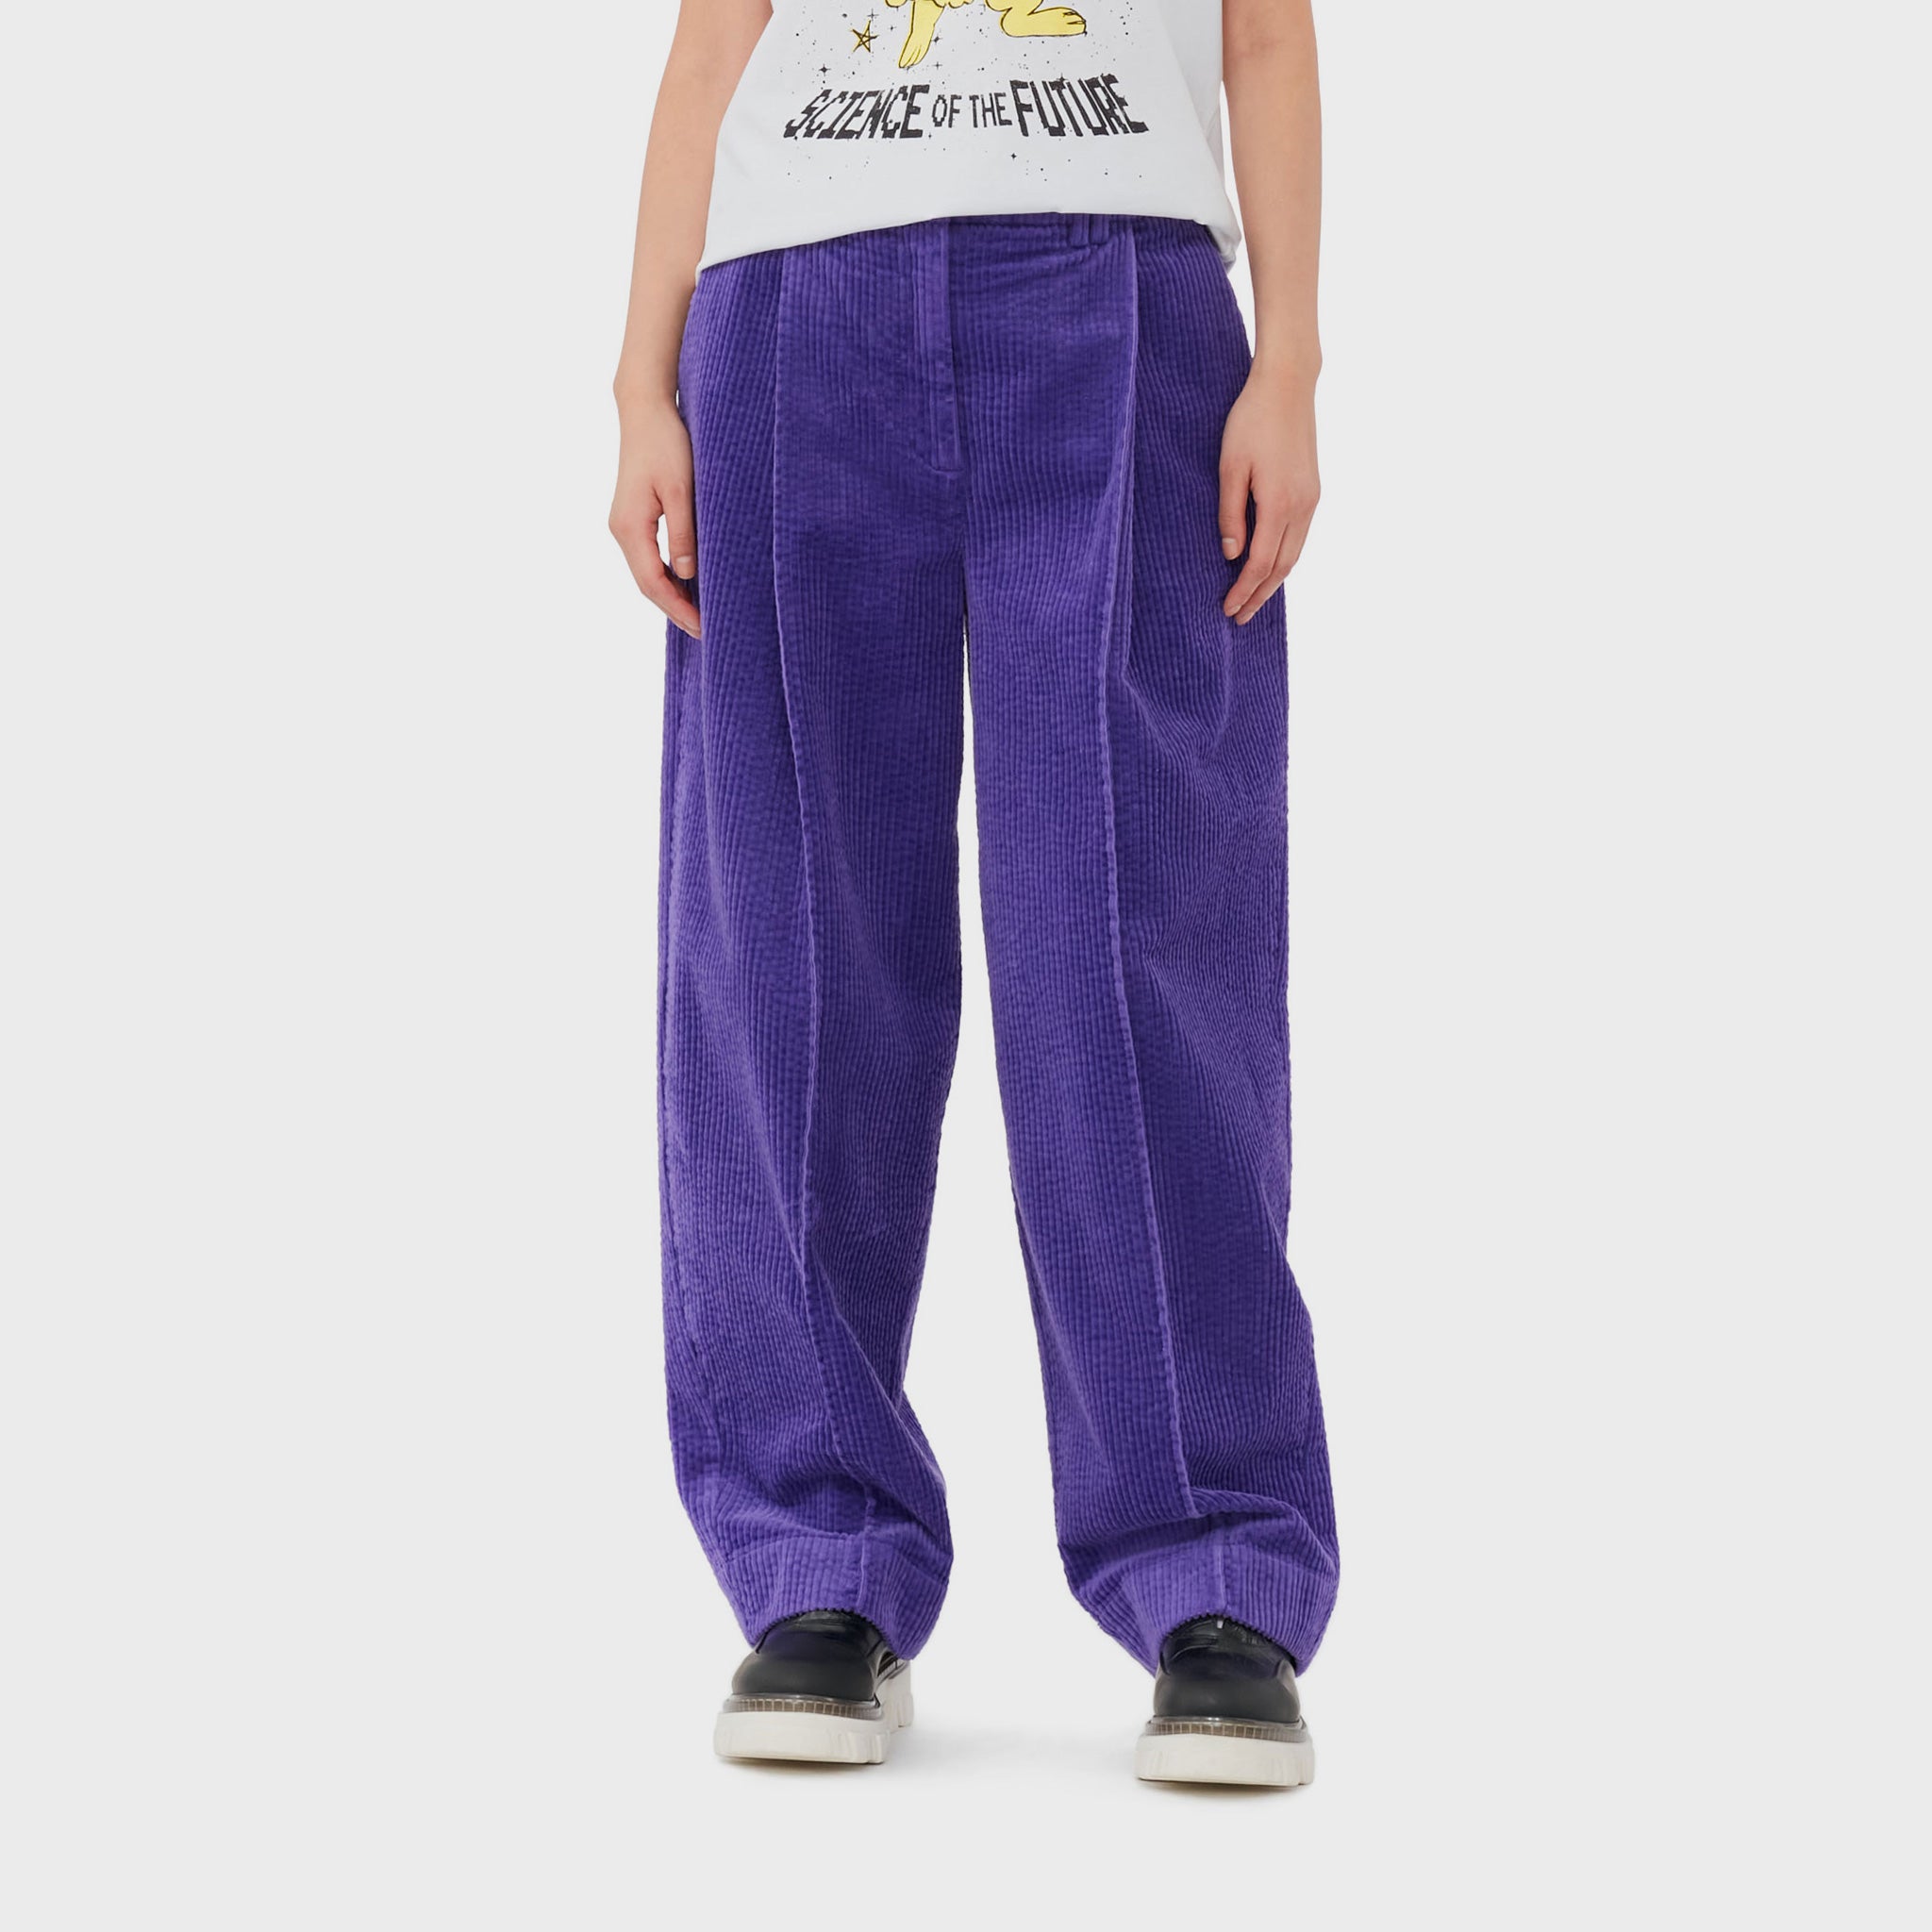 A model wears bright purple corduroy pants from GANNI featuring a cool, baggy fit.